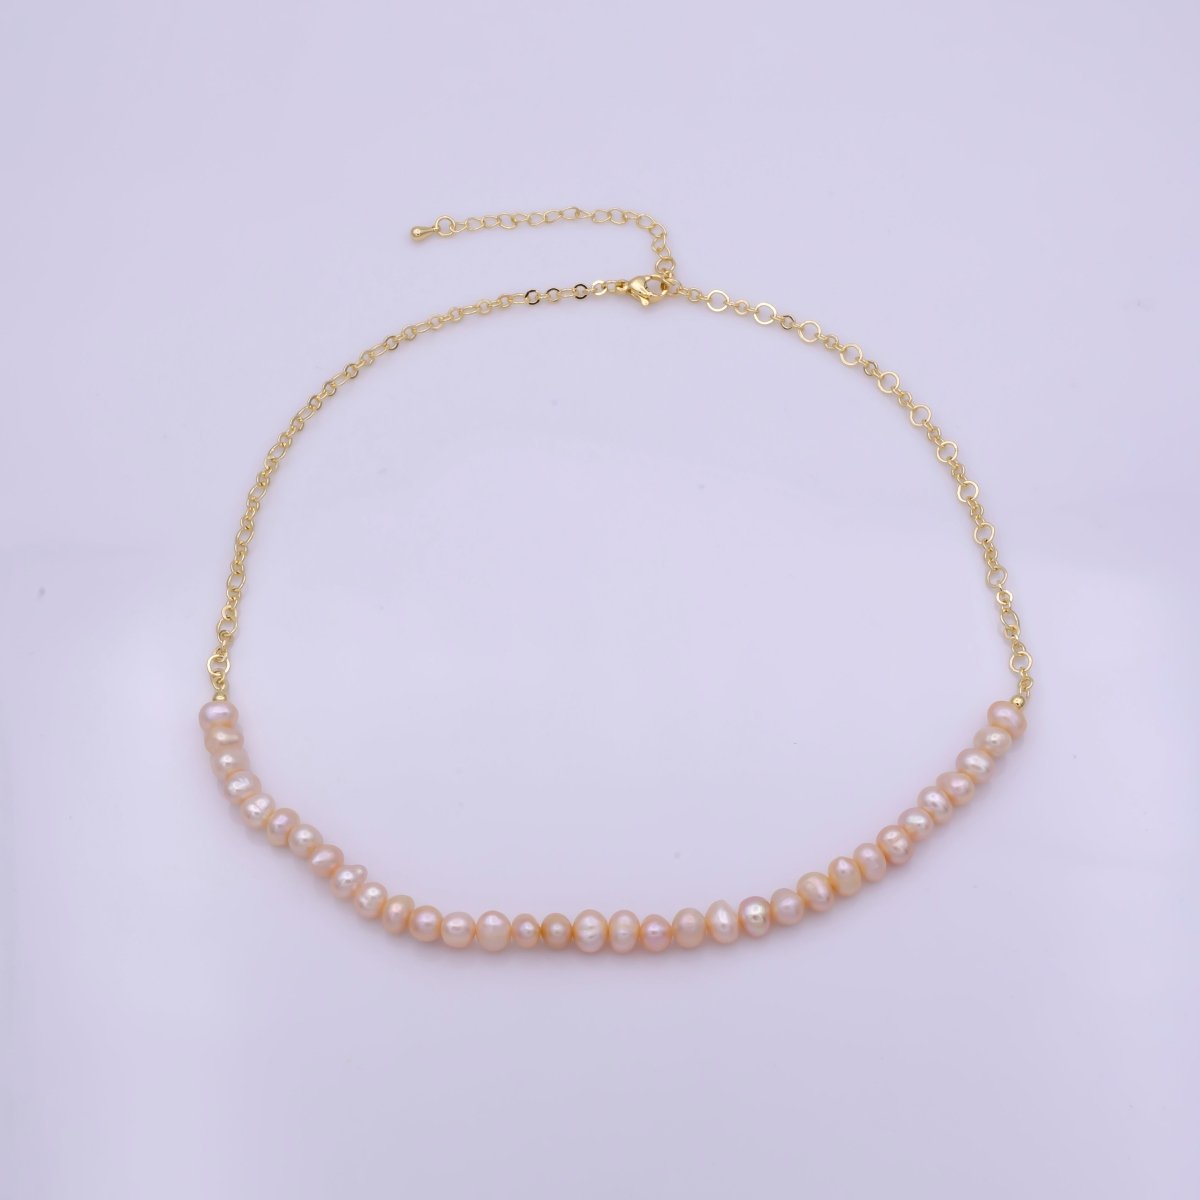 Gold Filled Chain Pink Freshwater Rice Pearl Necklace, 6mm Pearl Necklace for Women, Baroque Pearl Necklace | WA-409 Clearance Pricing - DLUXCA